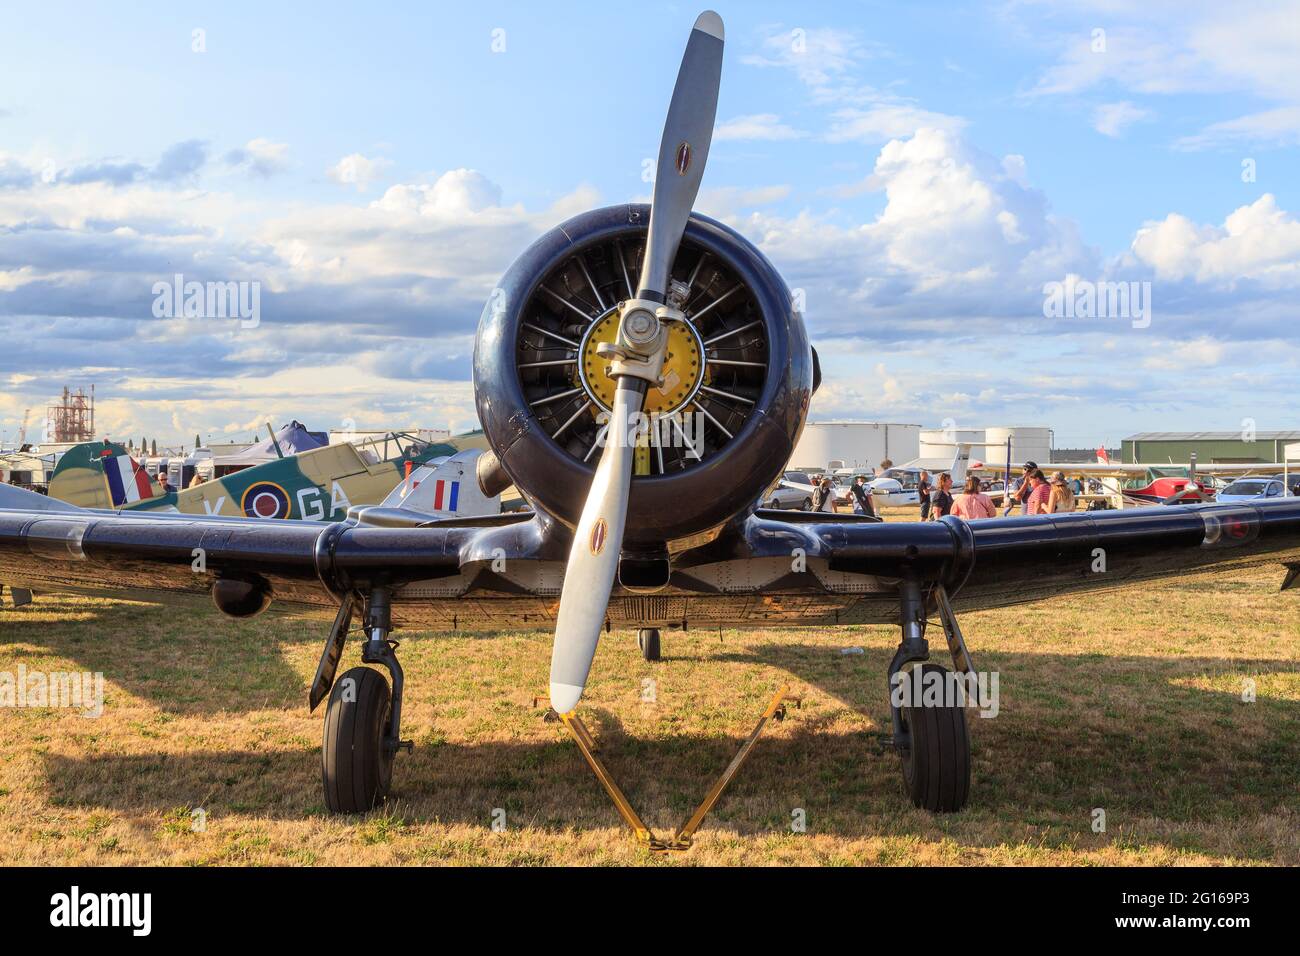 Front view of a World War 2 era North American Harvard (aka T-6 Texan), a military trainer plane Stock Photo